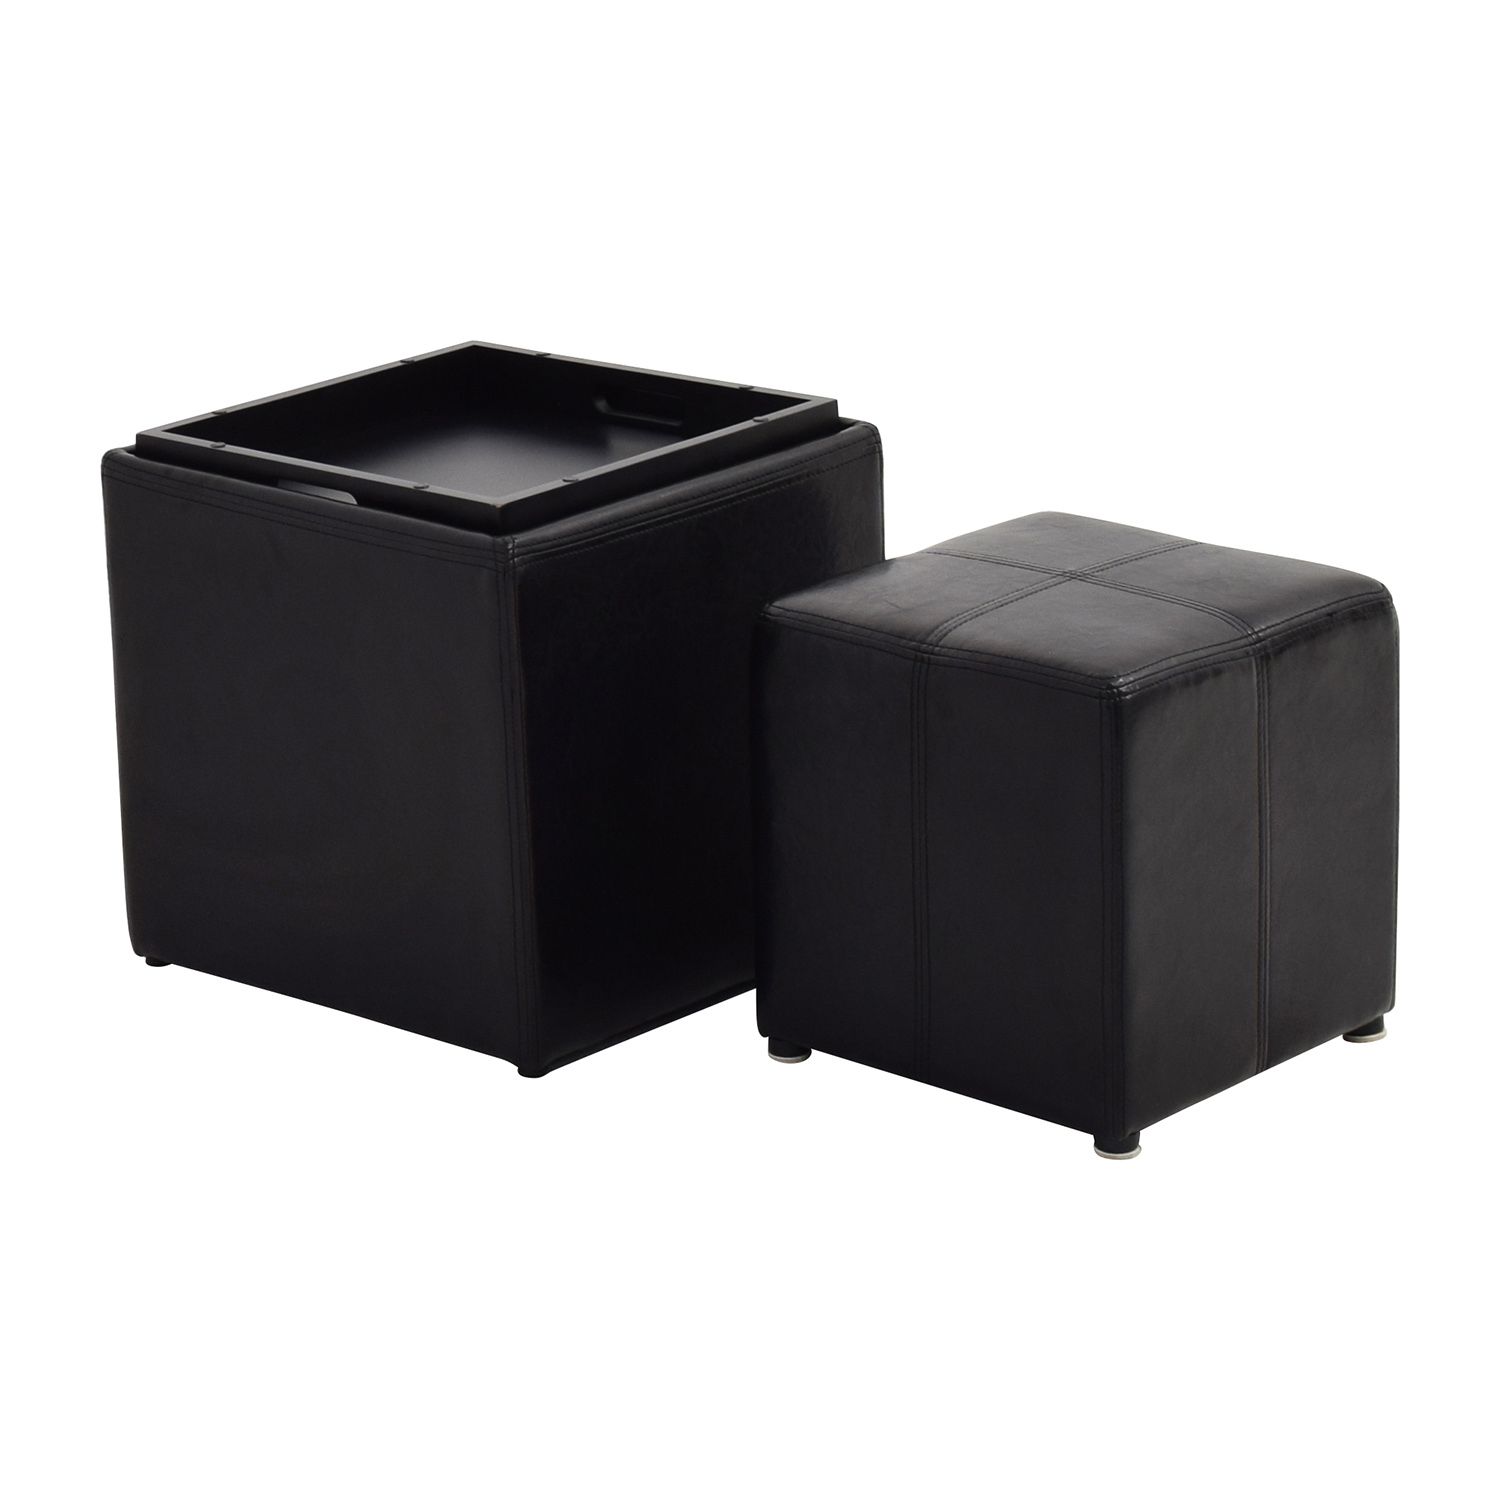 70% Off – Black Leather Storage Ottoman With Smaller Ottoman / Chairs With Regard To Black Leather Ottomans (View 11 of 20)